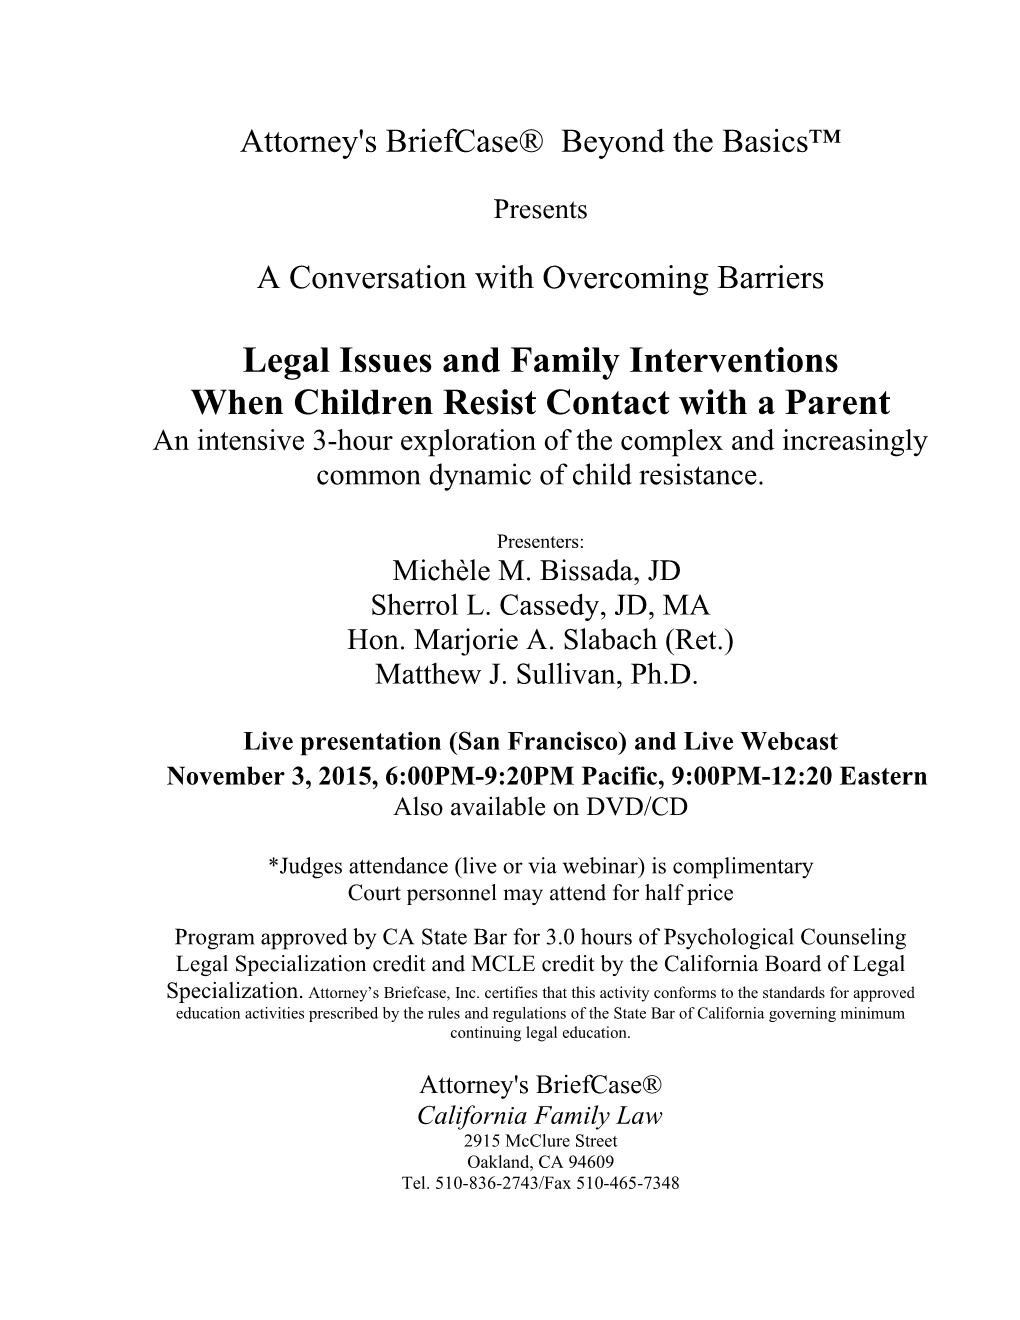 Legal Issues and Family Interventions